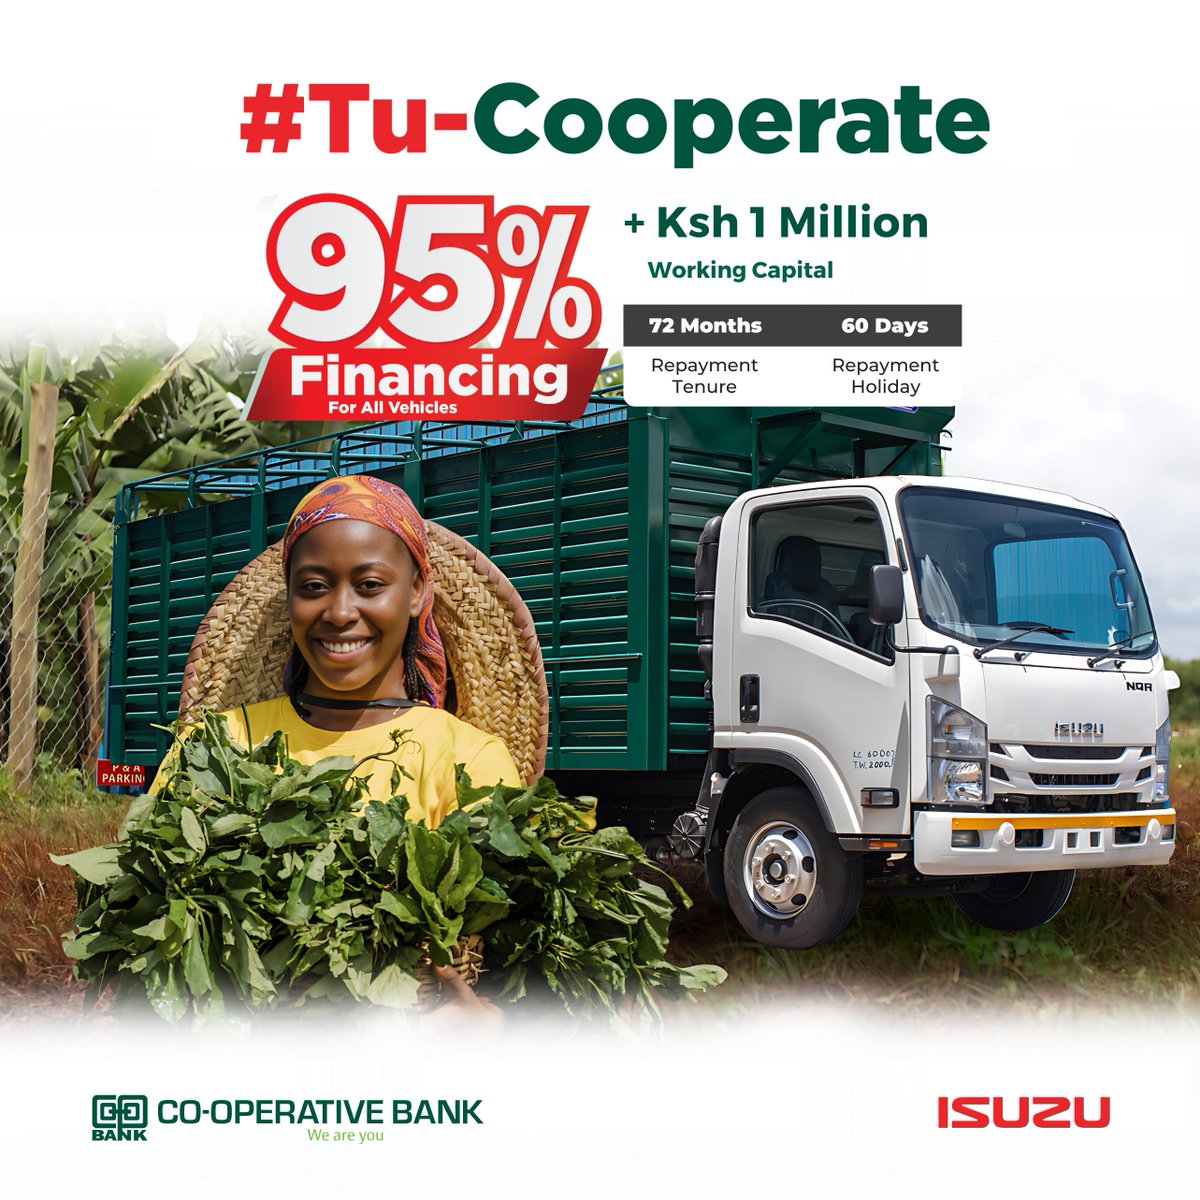 Imarisha biashara yako with a new ISUZU NQR truck for just KES 256,000. Na isitoshe, you can also access an extra KES 1 million for working capital and enjoy a 6-year repayment plan. Dial 0800 724 724 today #TuCooperate pamoja!